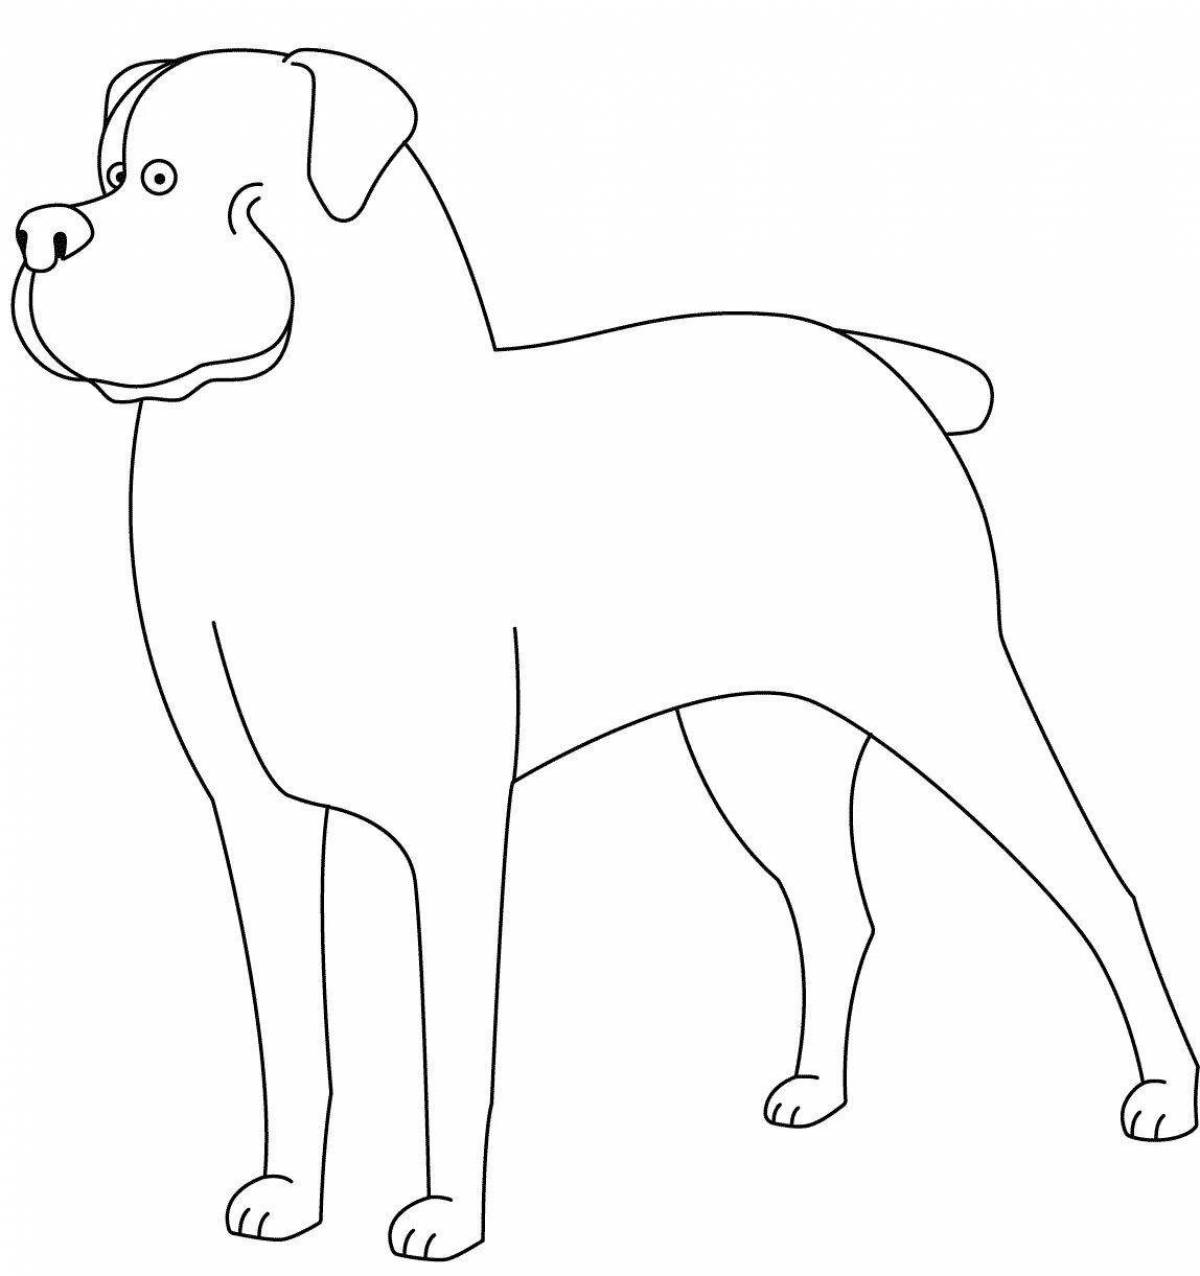 Coloring page inquisitive rottweiler